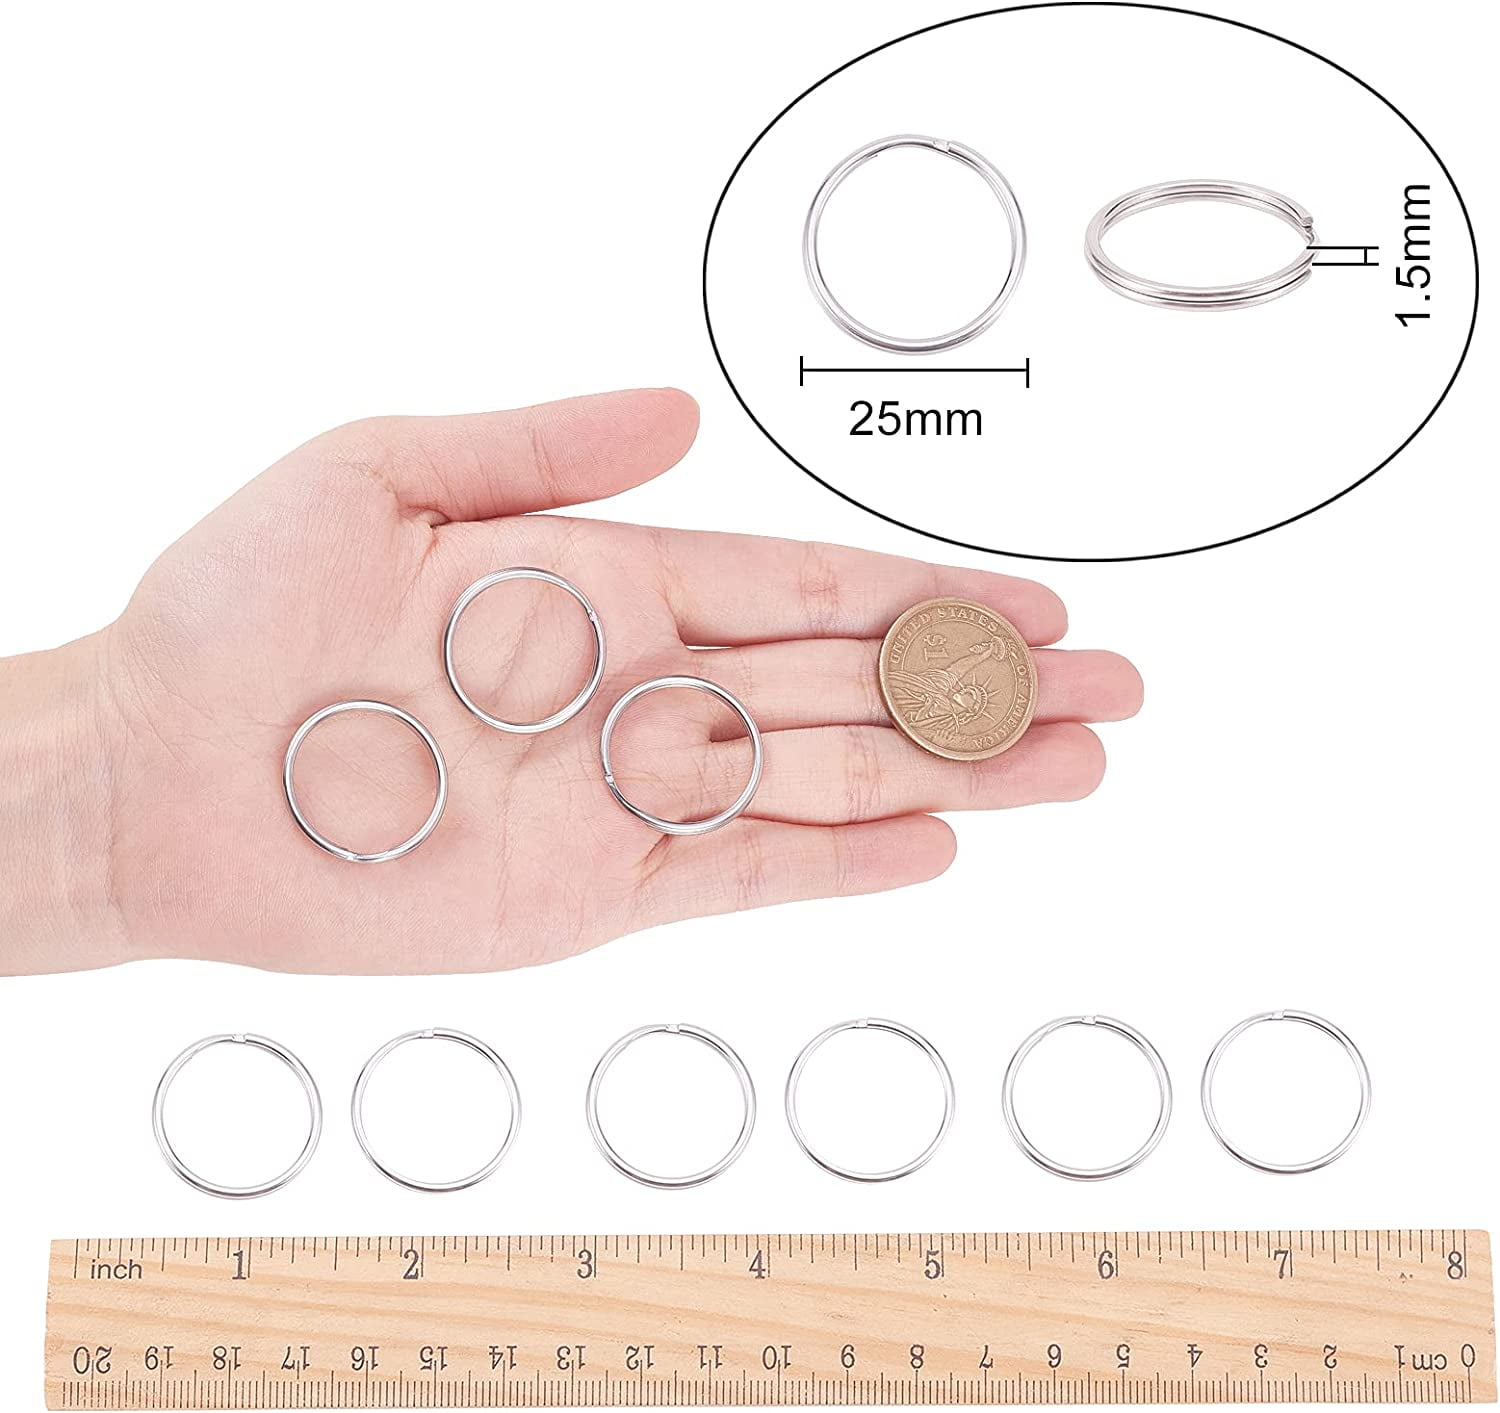 Stainless Steel Key Rings - 5 Pcs ~1inch, 25mm Round Split Key Rings for  Keychains - Surgical Grade Stainless Steel Keychain Rings